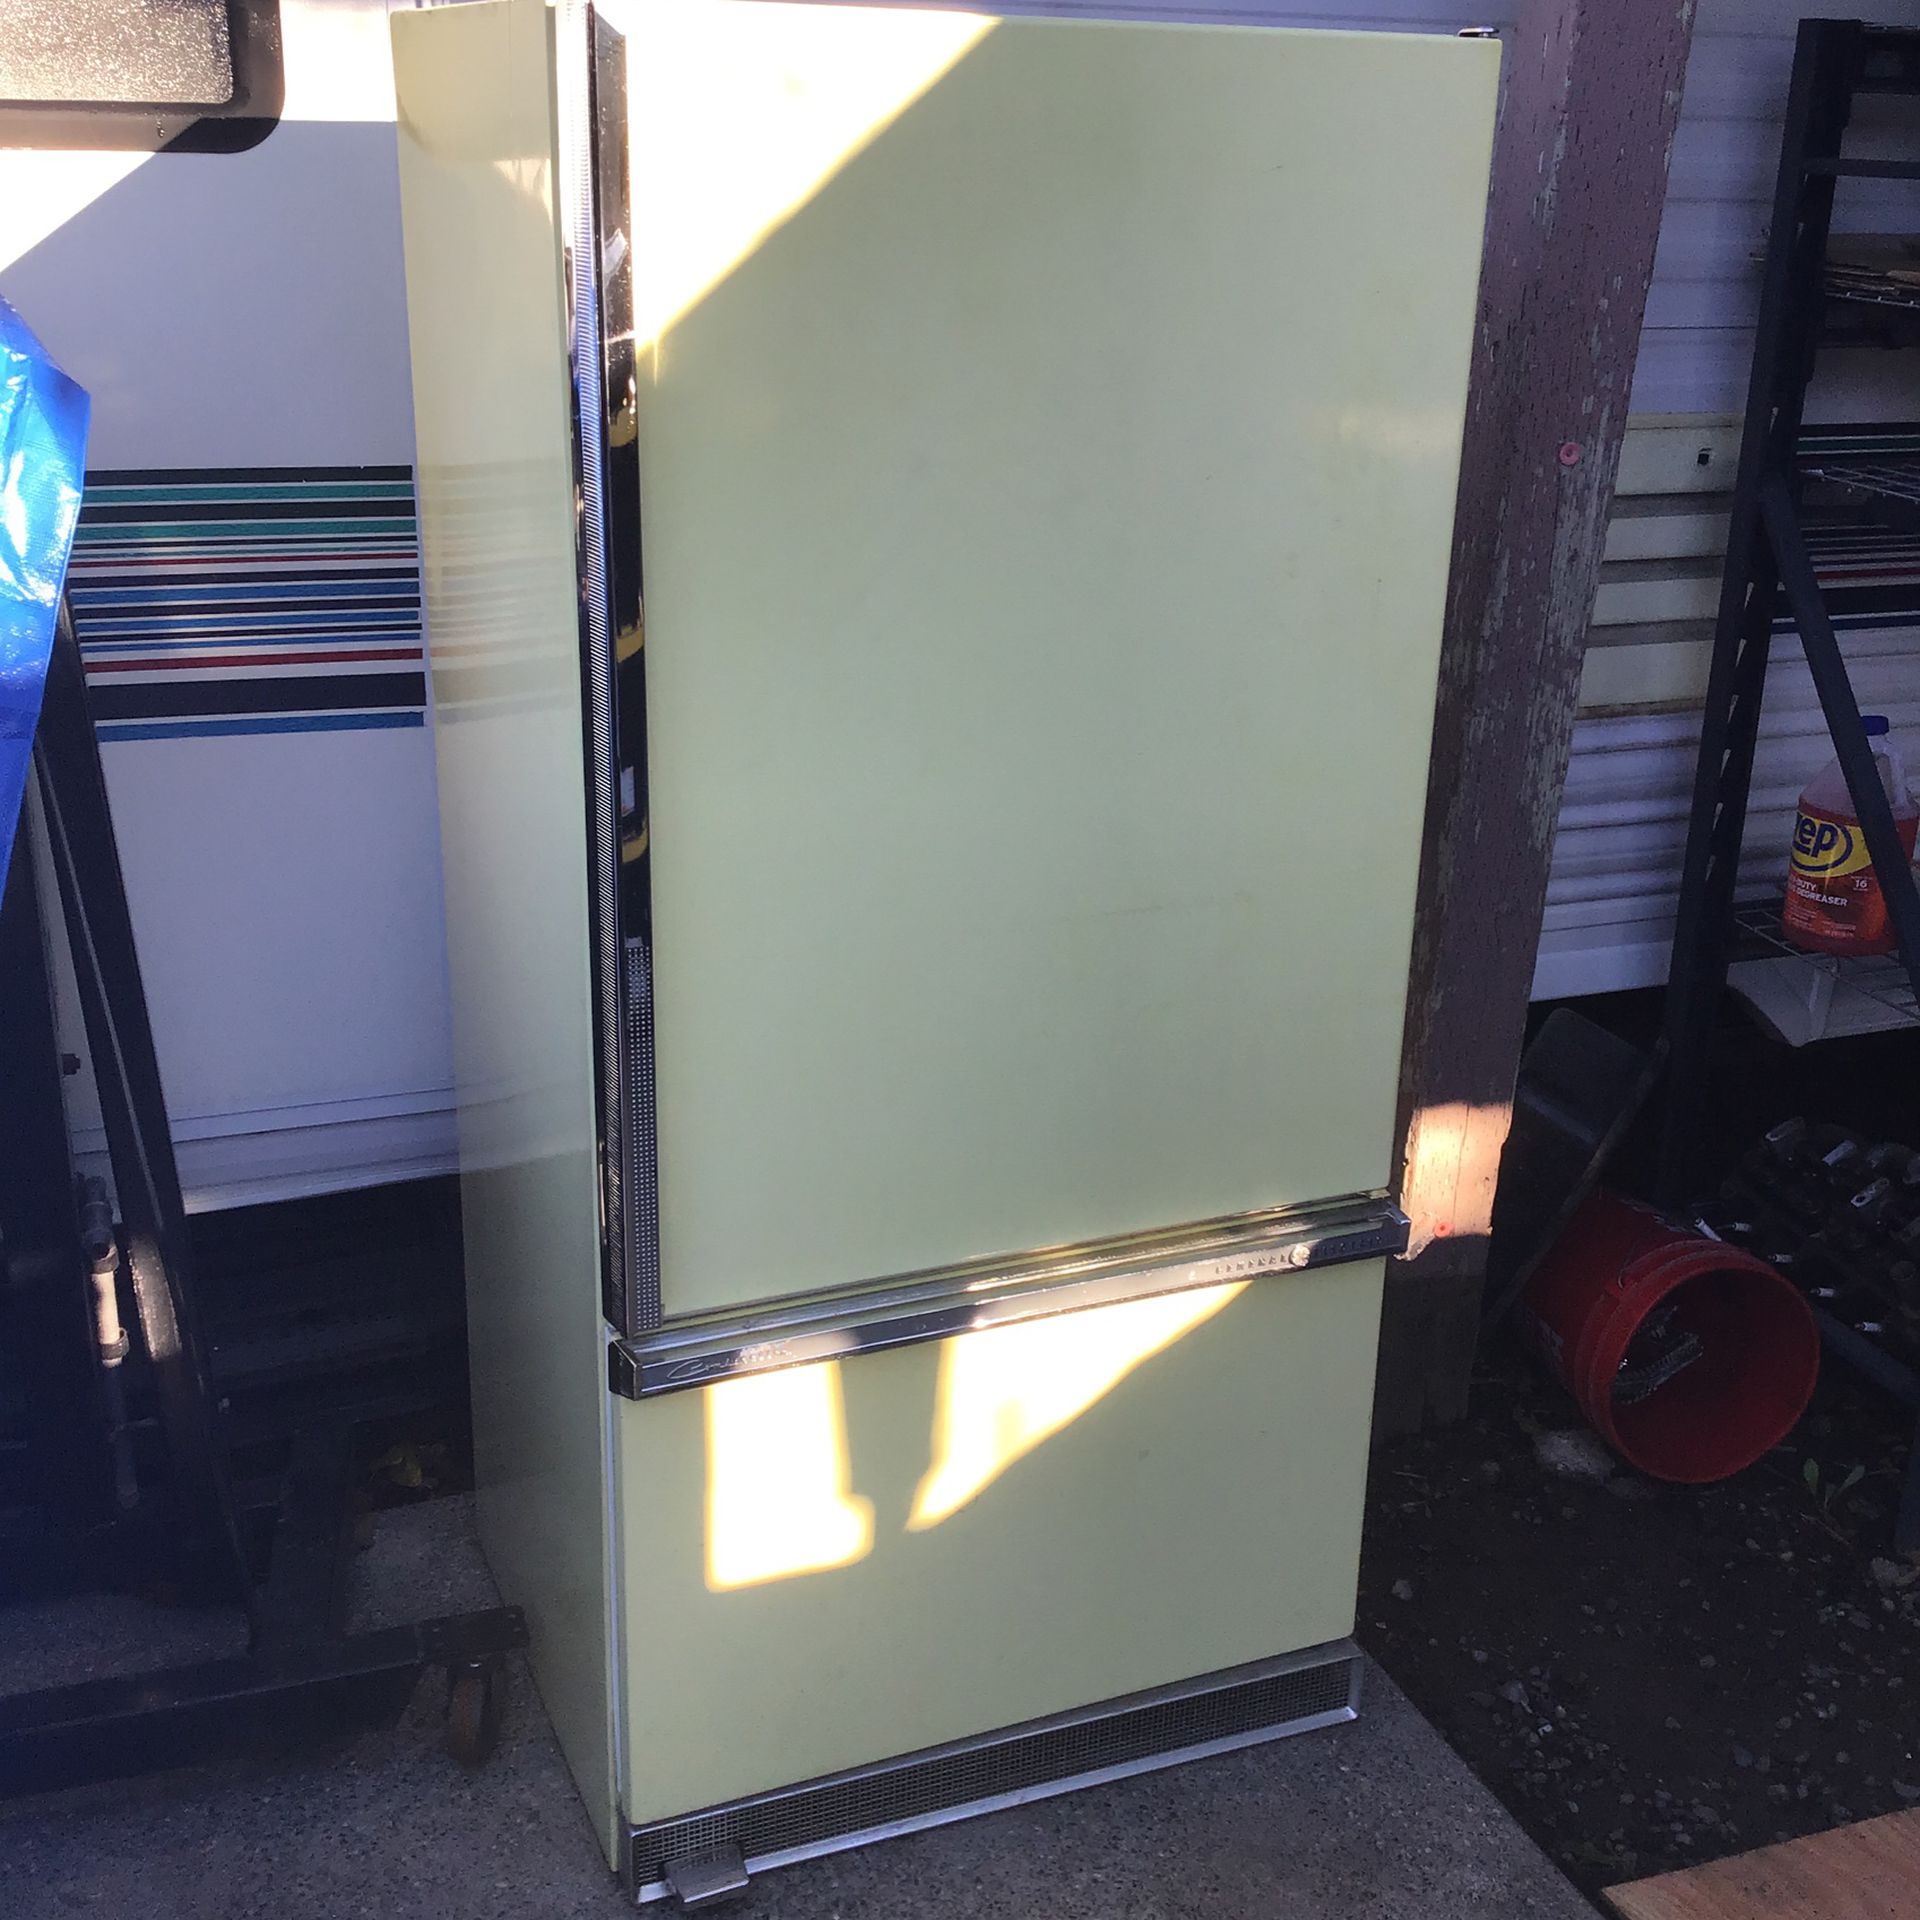 1956 General Electric Refrigerator Very Nice Shape All Rewired So Works Just Like New!